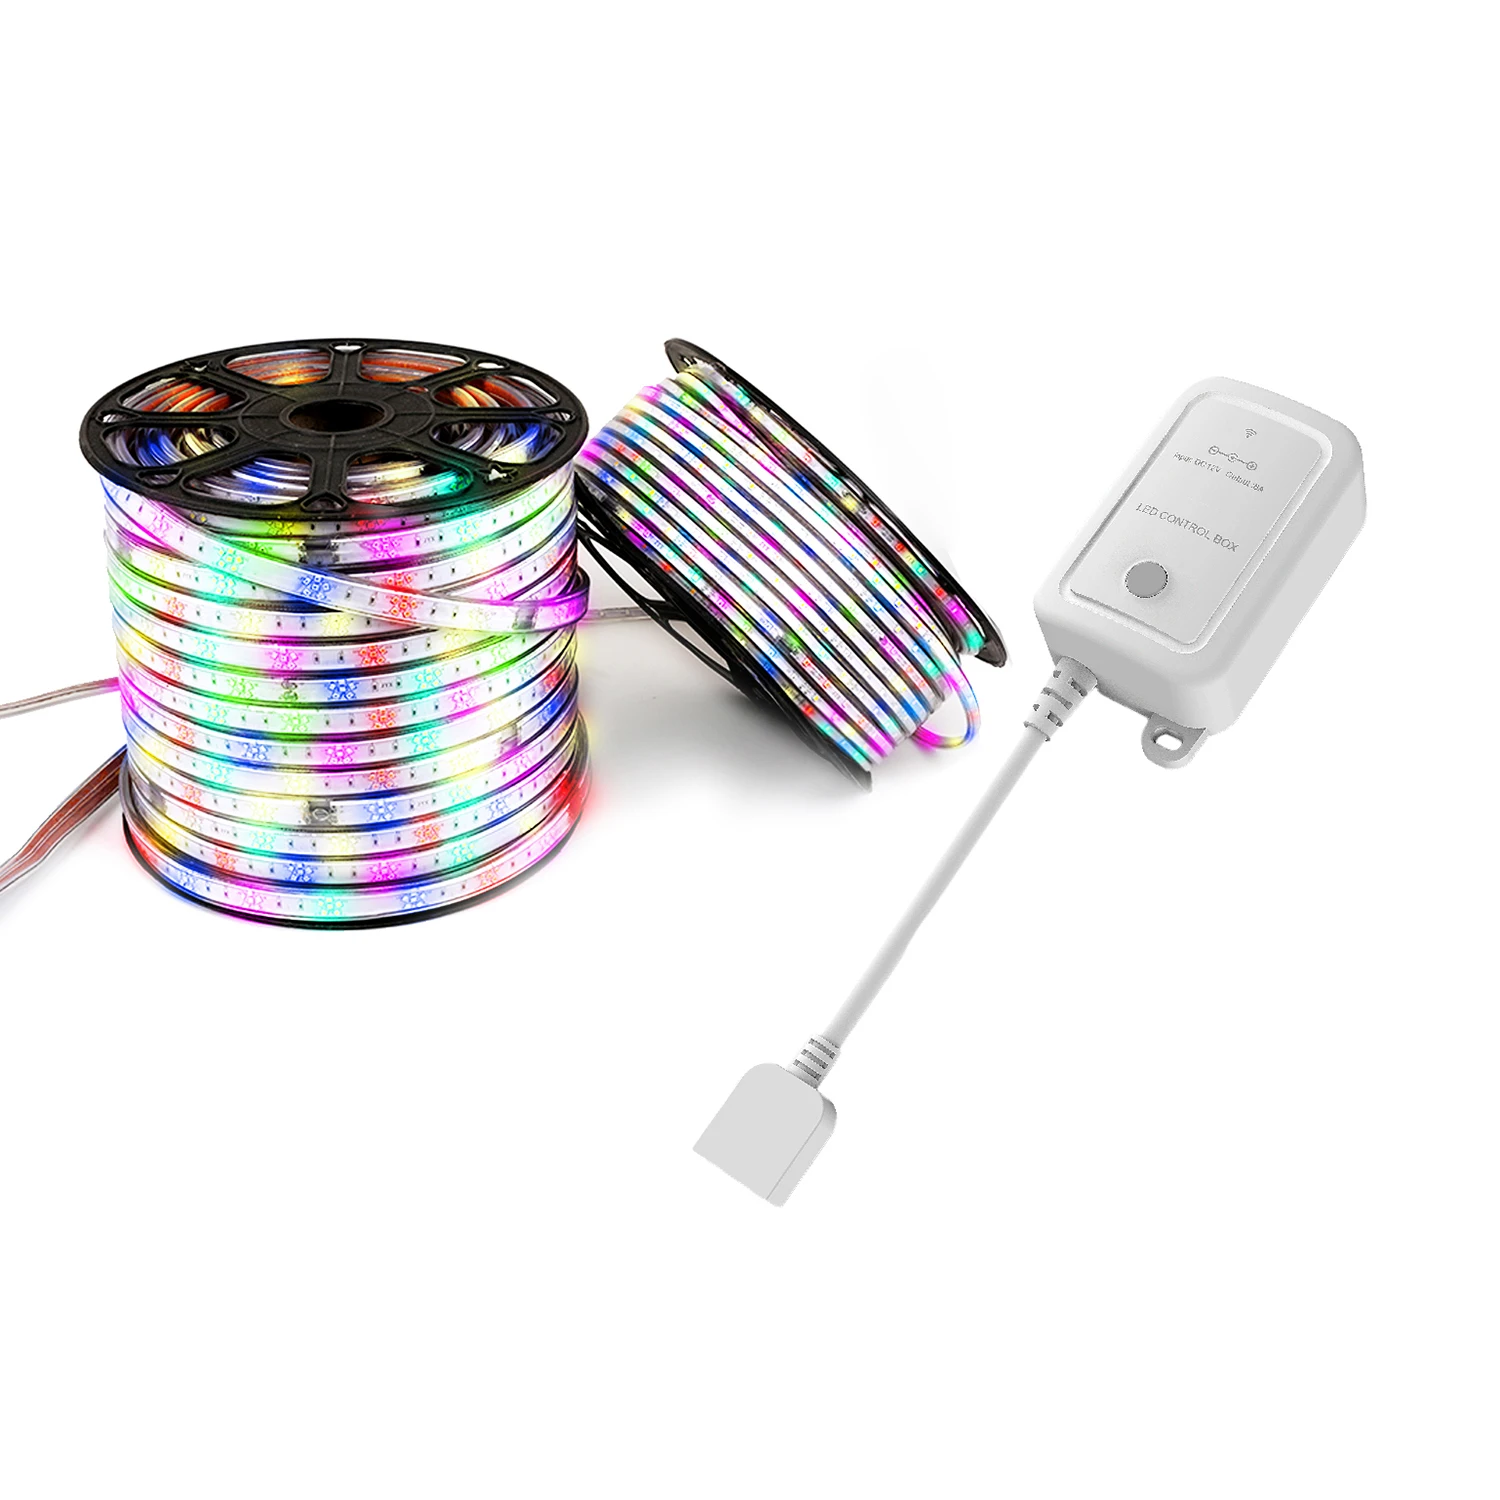 Tuya APP Control WIFI RGB LED Strip Controller for Bedroom Home and Holiday Decoration